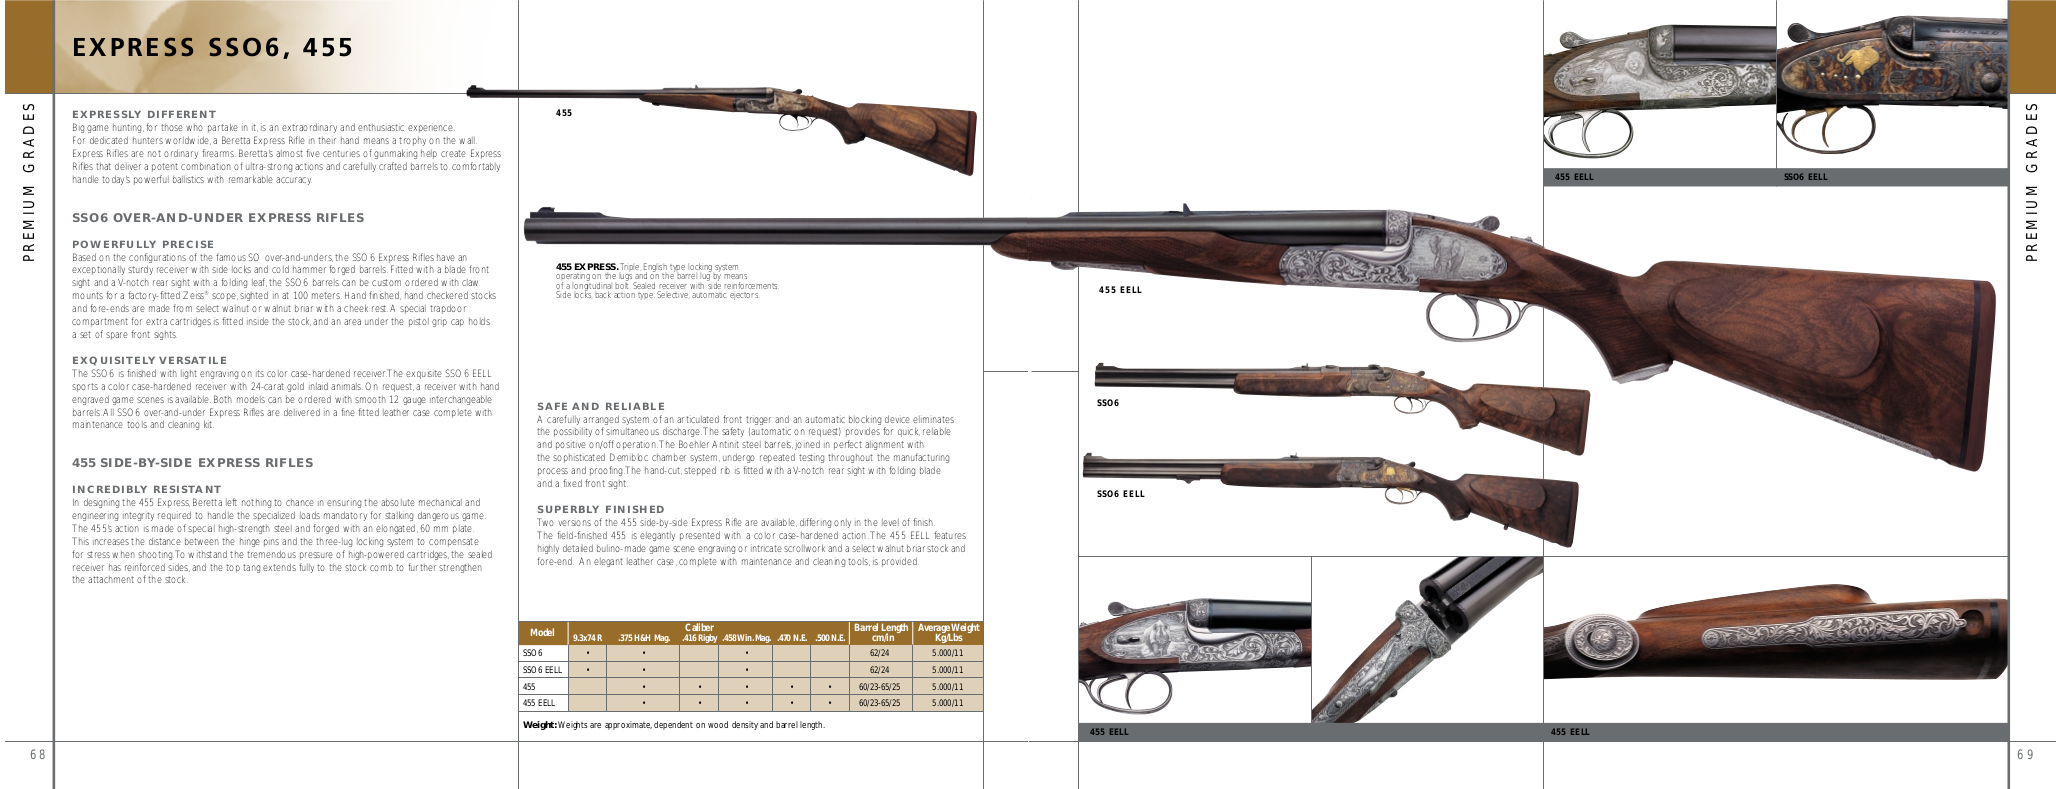 A page from an old Beretta catalogue featuring the Beretta 455 double rifle and all available options. (Picture courtesy Beretta).